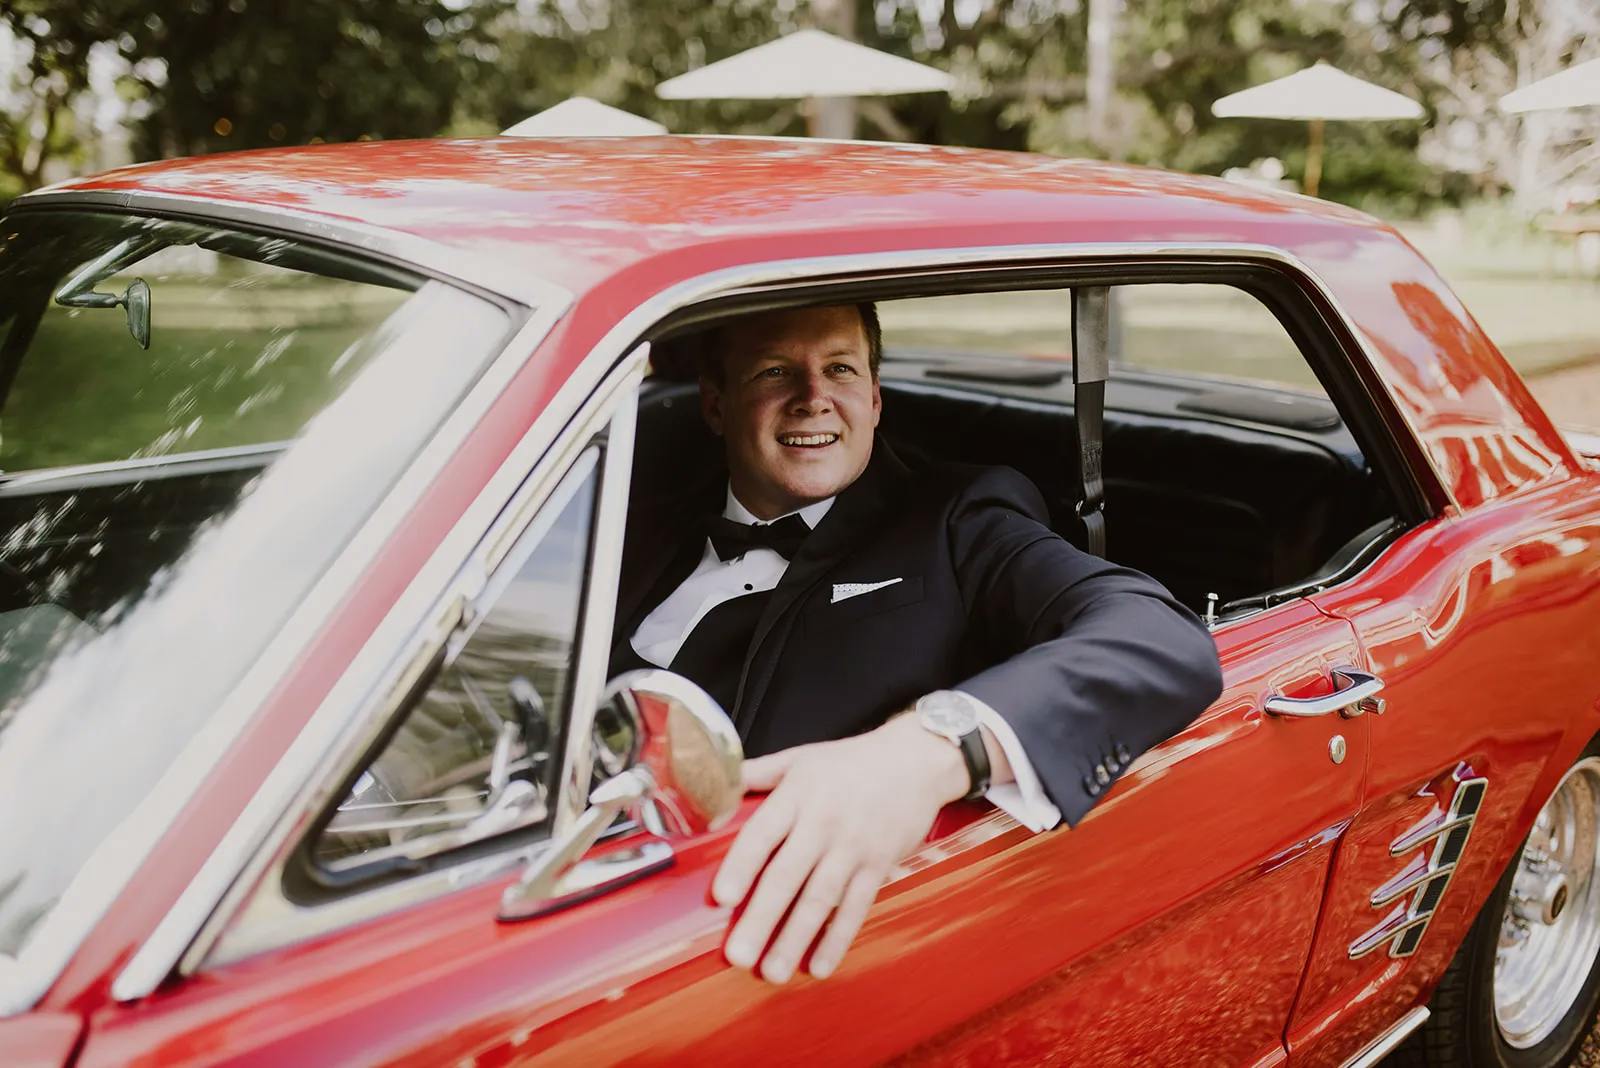 A man in a black tuxedo sits in the driver's seat of a classic red car, with the window rolled down and his arm resting on the ledge. He is smiling and looking out of the window. Sunlight filters through trees in the background.